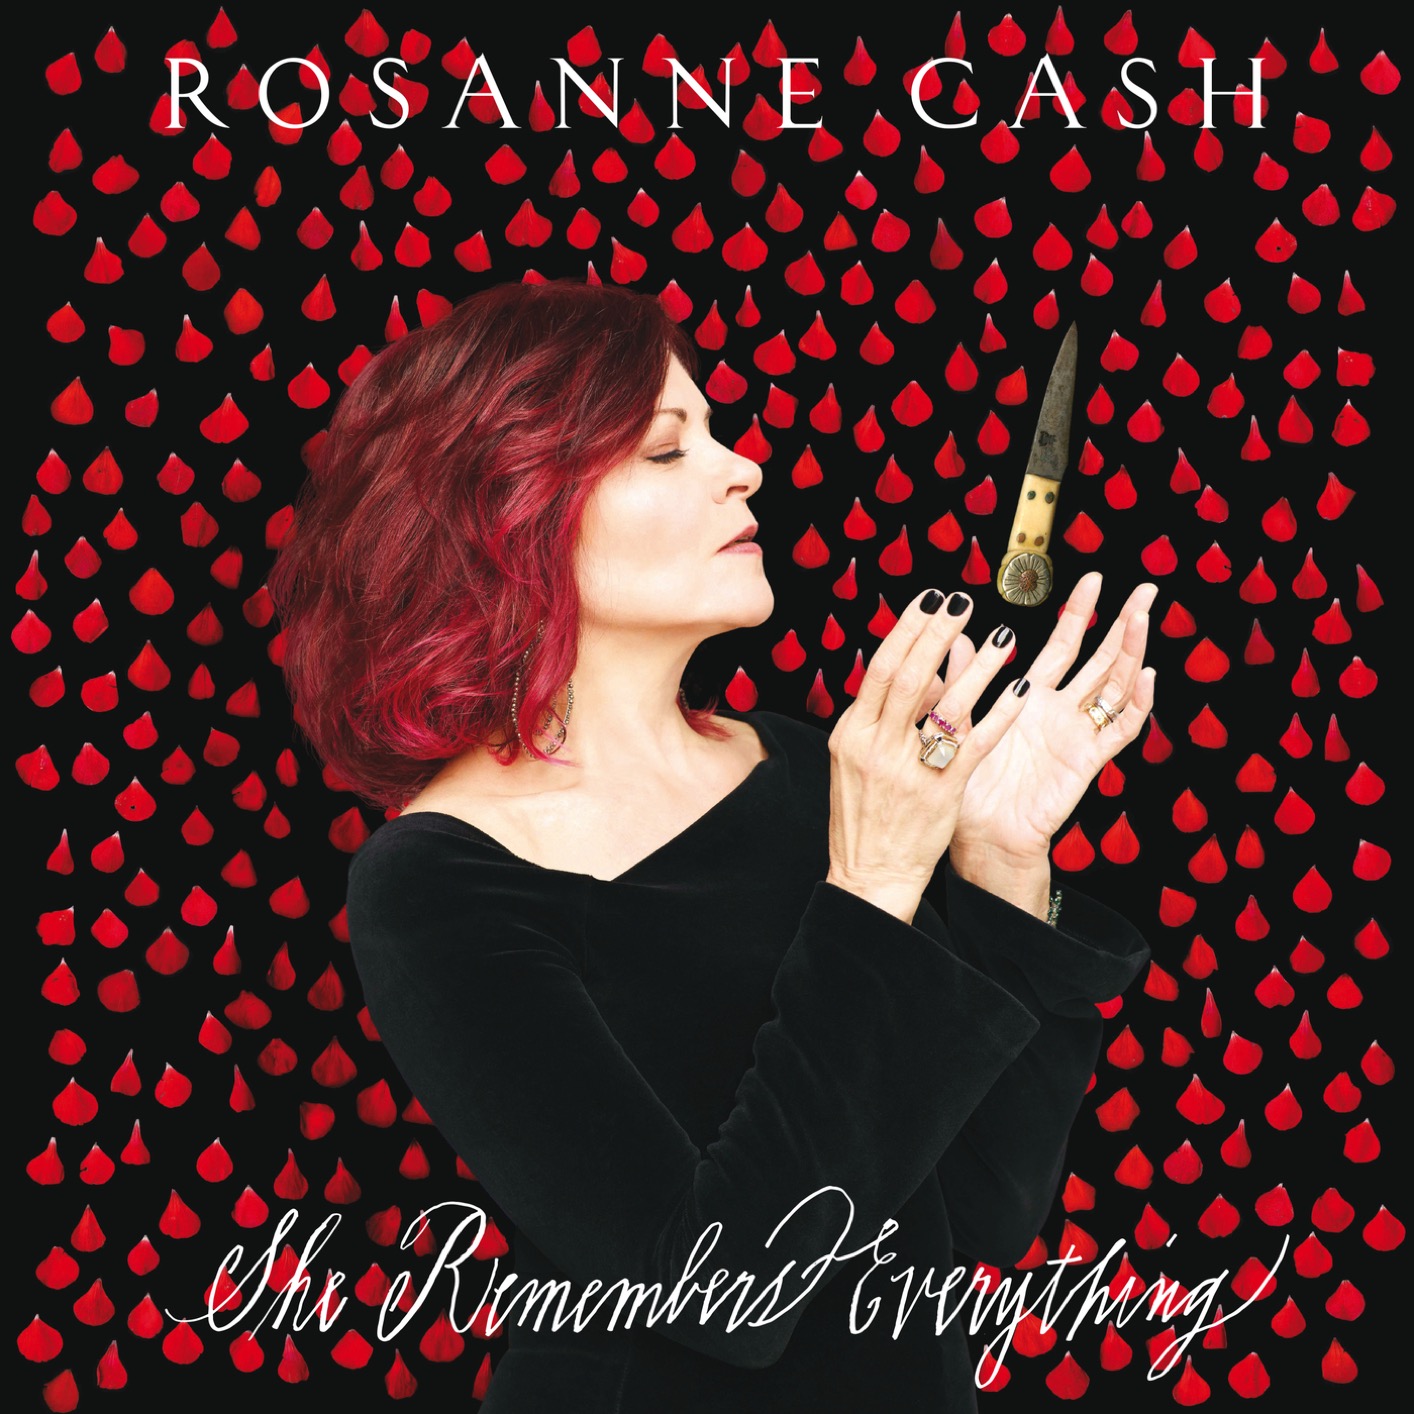 Rosanne Cash - She Remembers Everything (Deluxe Edition) (2018) [FLAC 24bit/88,2kHz]